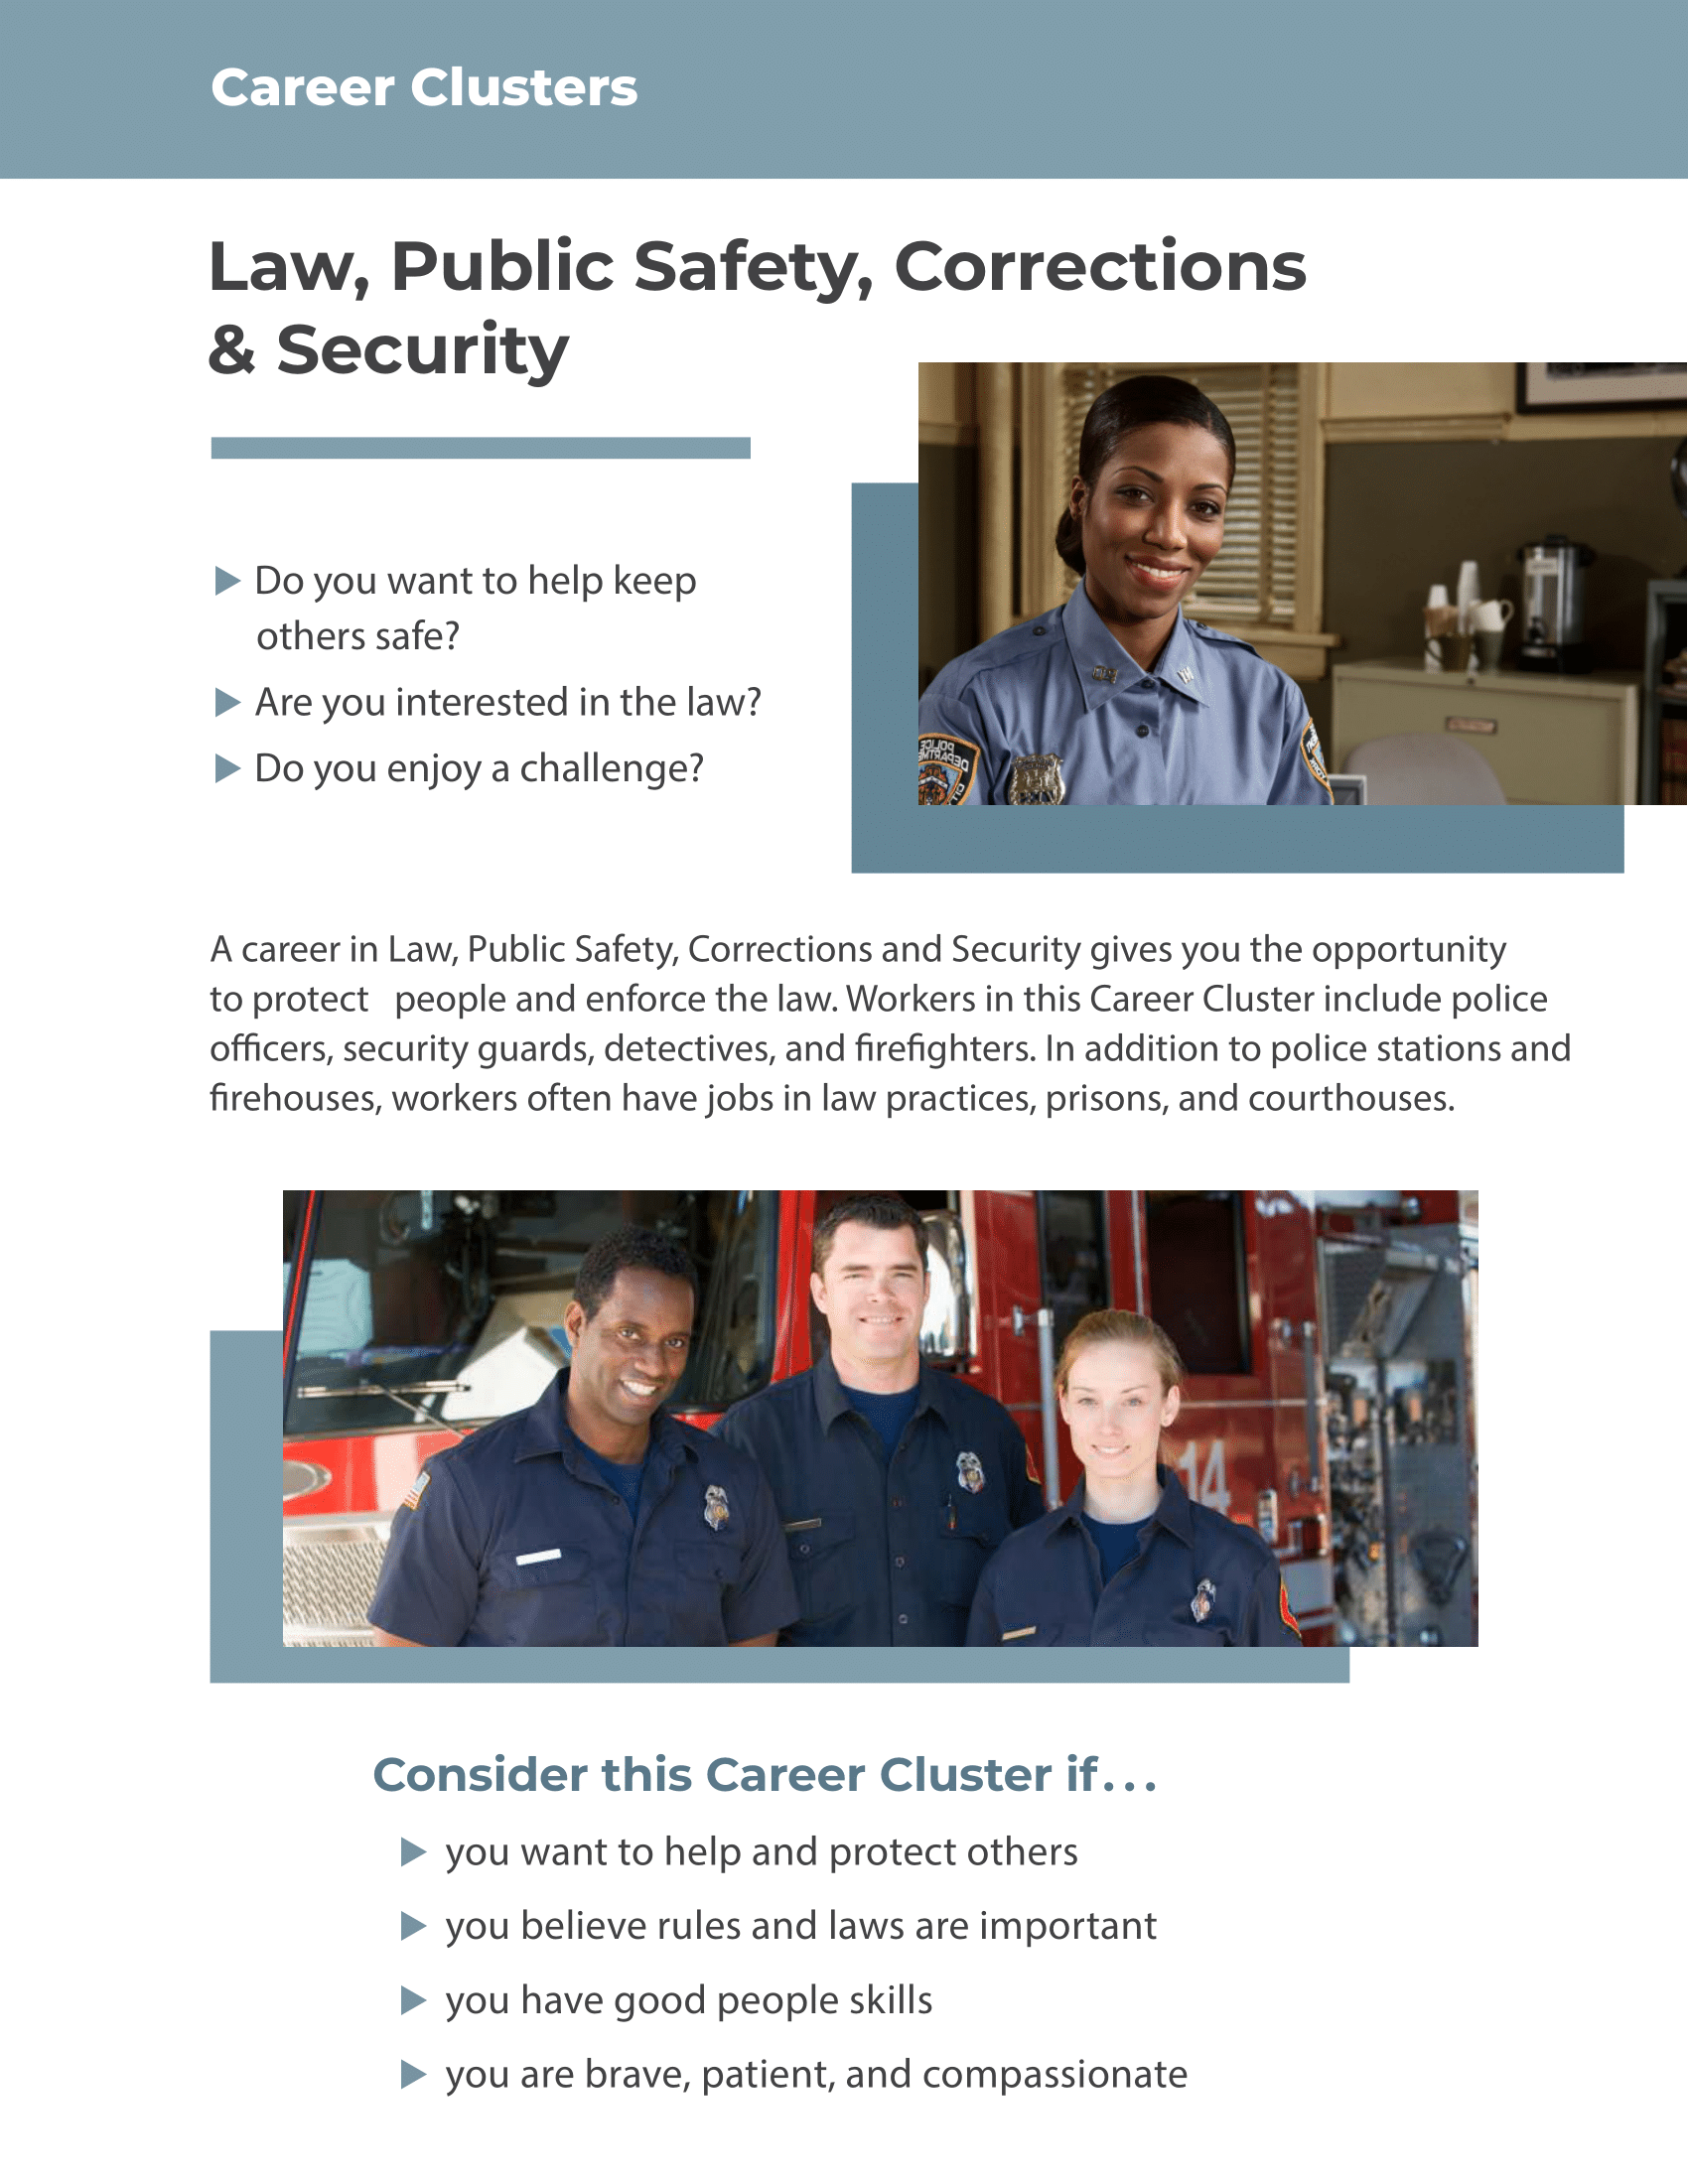 Career Clusters - Law, Public Safety, Corrections, and Security